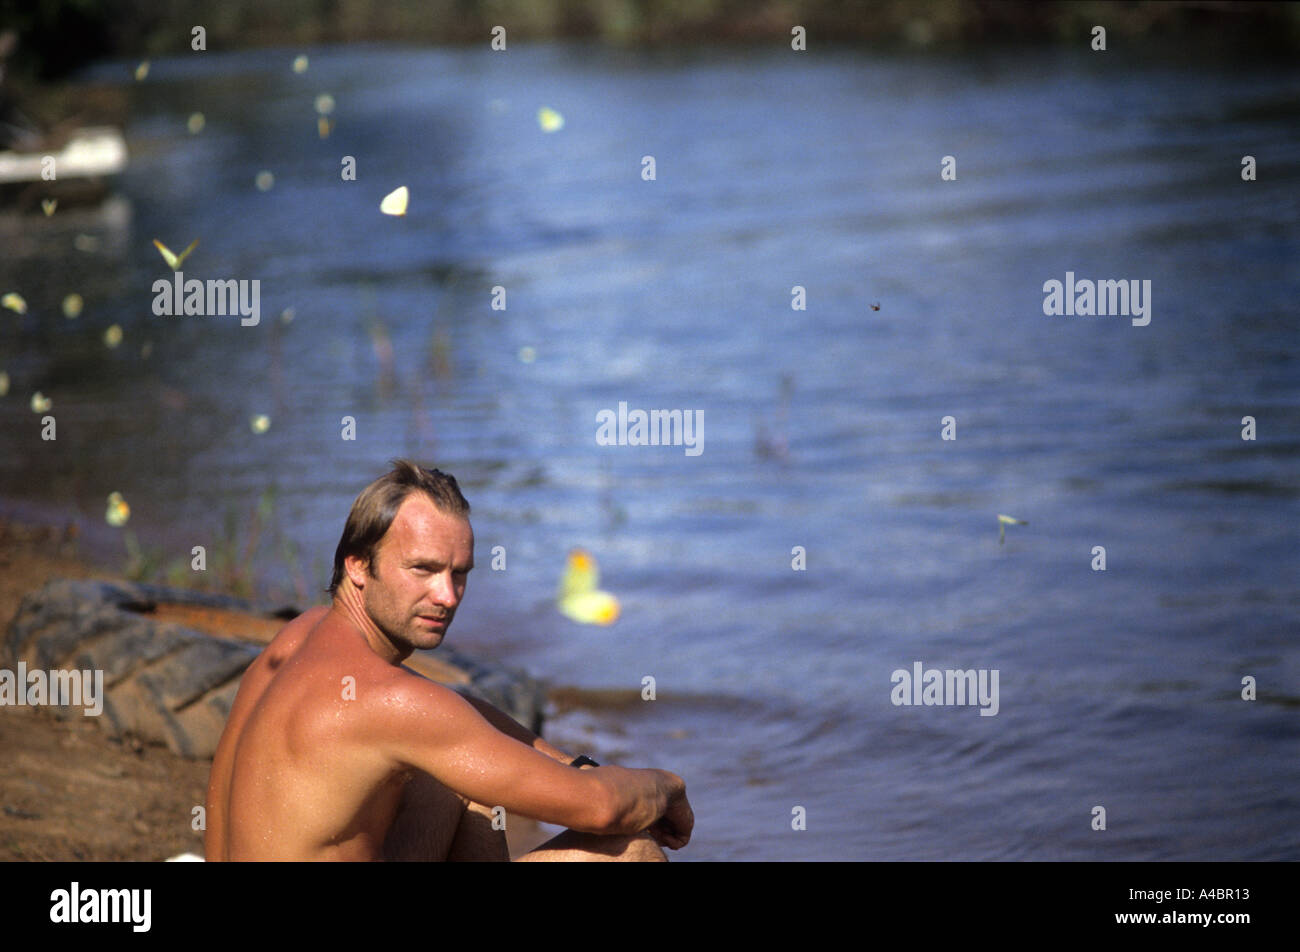 Xingu Indigenous Park, Brazil. Sting sitting beside the river with butterflies around him; Nov 1990. Stock Photo